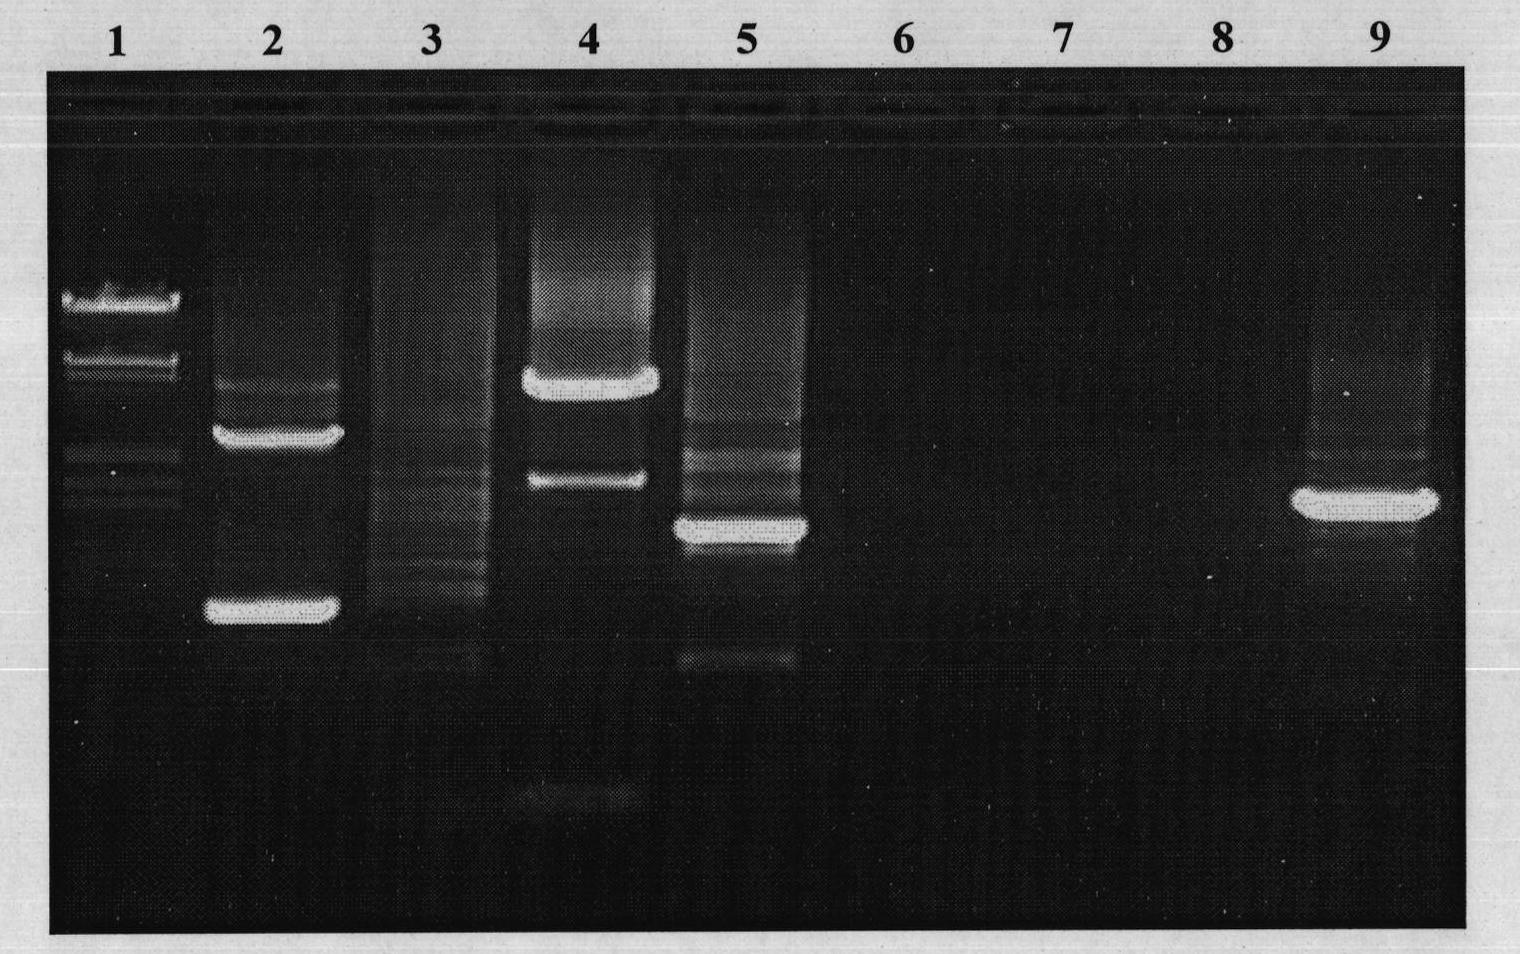 Cloning of rape Oleosin5'UTR sequence and application of Oleosin5'UTR sequence in elaioplast targeting expression